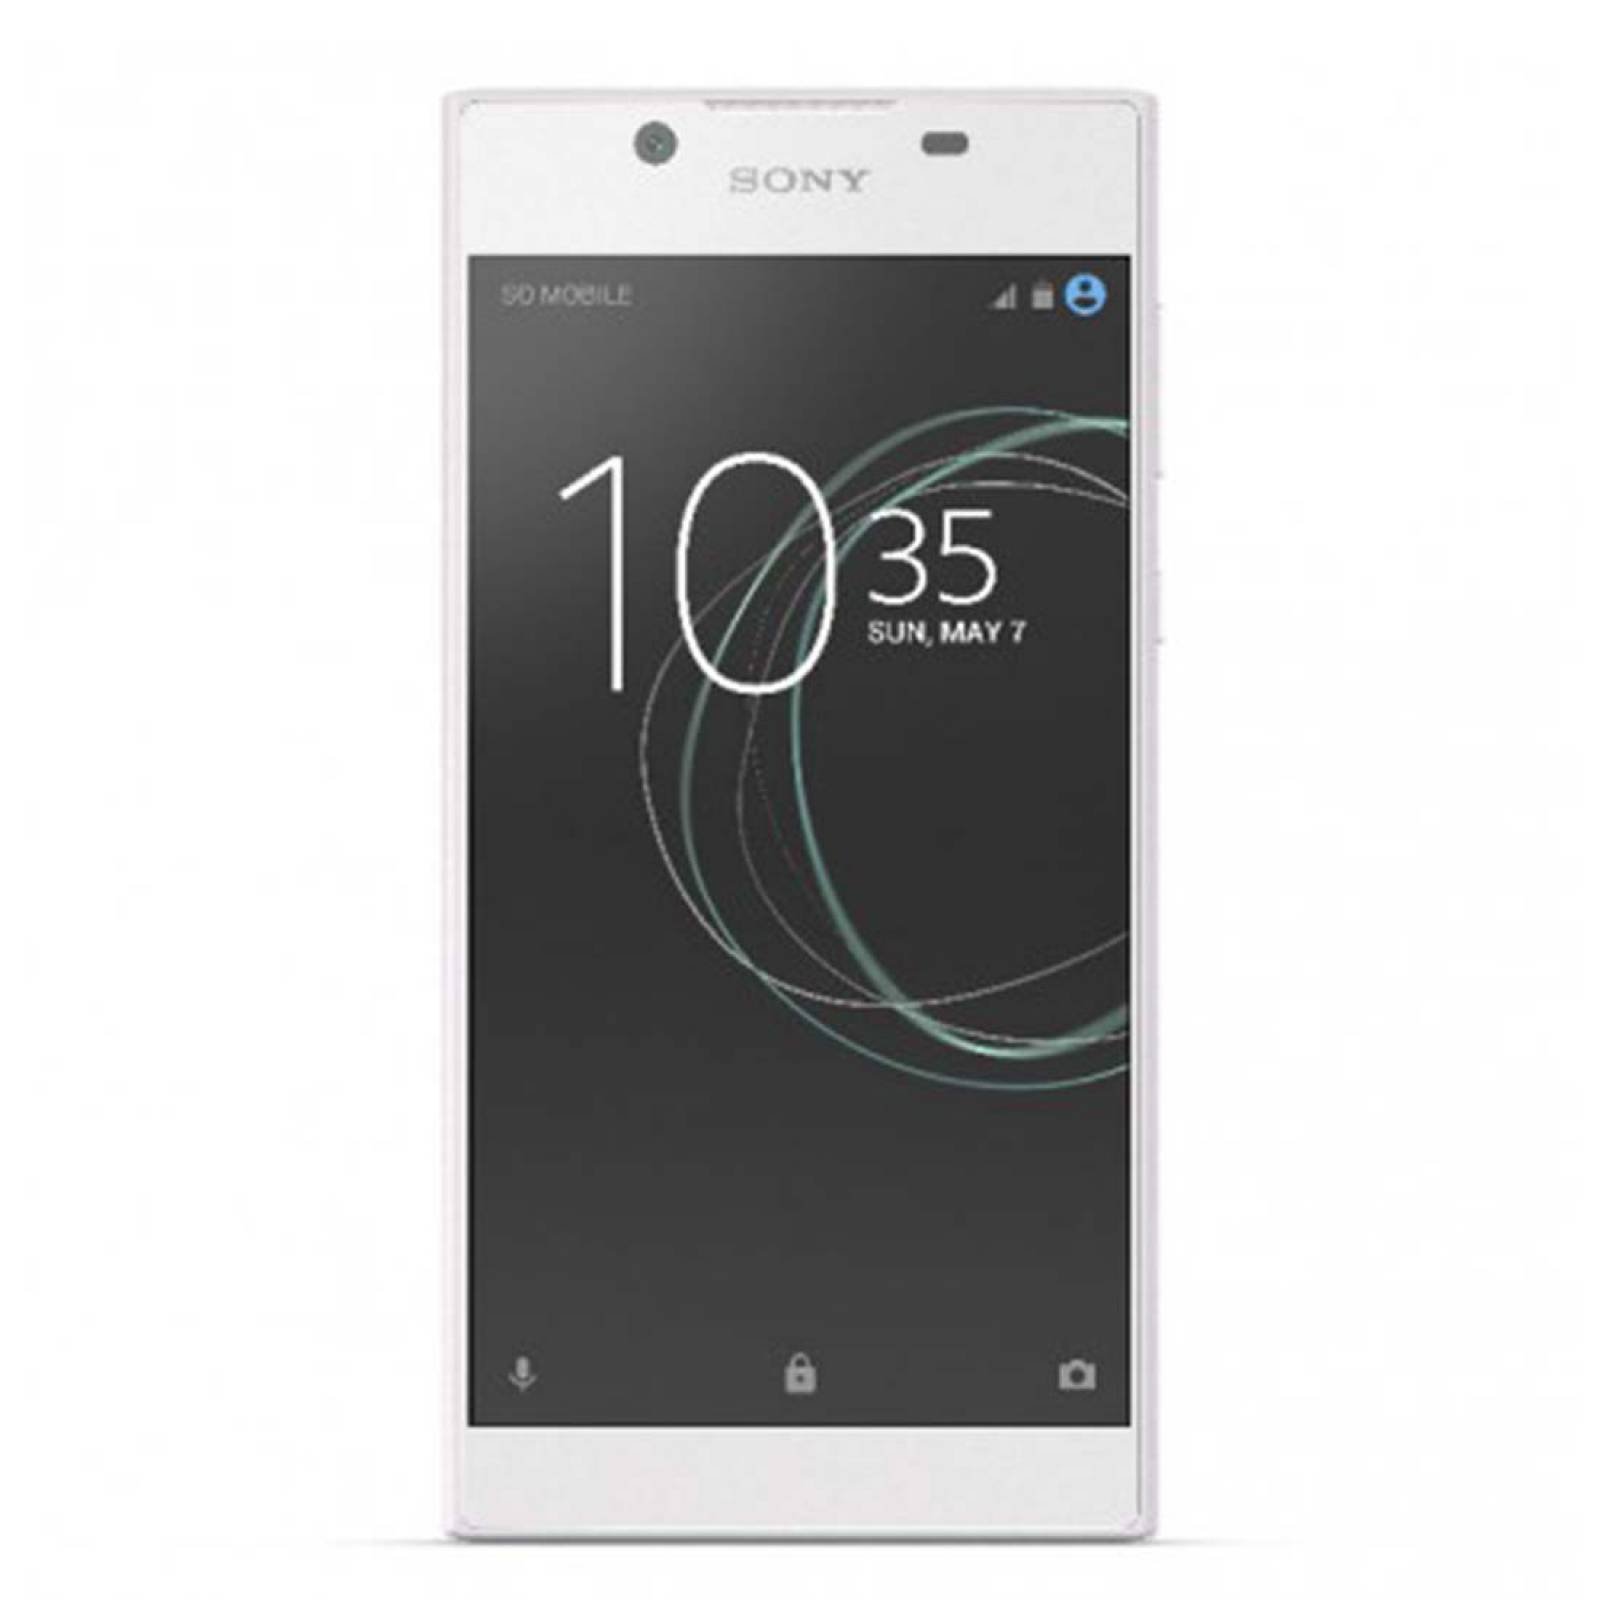 Sony Xperia L1 G3313 Smartphone 5.5 HD Android 7.0 2Gb RAM